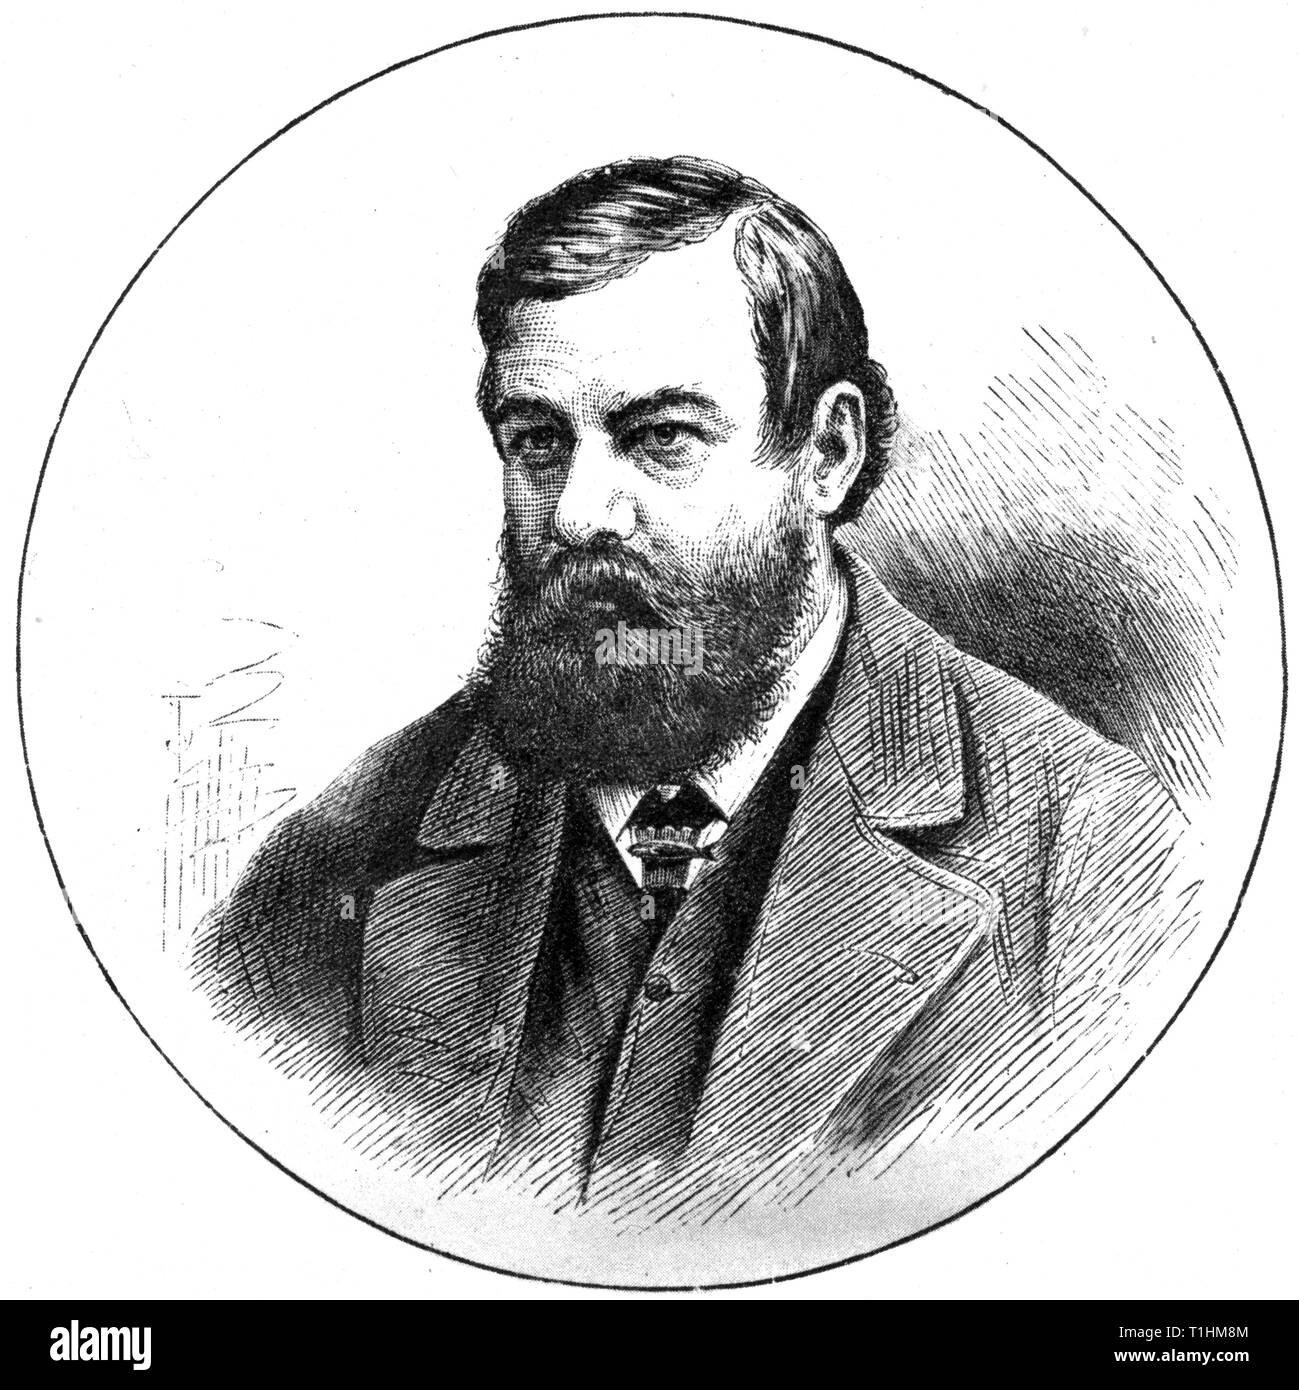 Frank Buckland (1826-1880). Engraving from the 'Illustrated London News', 1881. Francis Trevelyan Buckland (1826-1880), English surgeon, zoologist and natural historian. Stock Photo